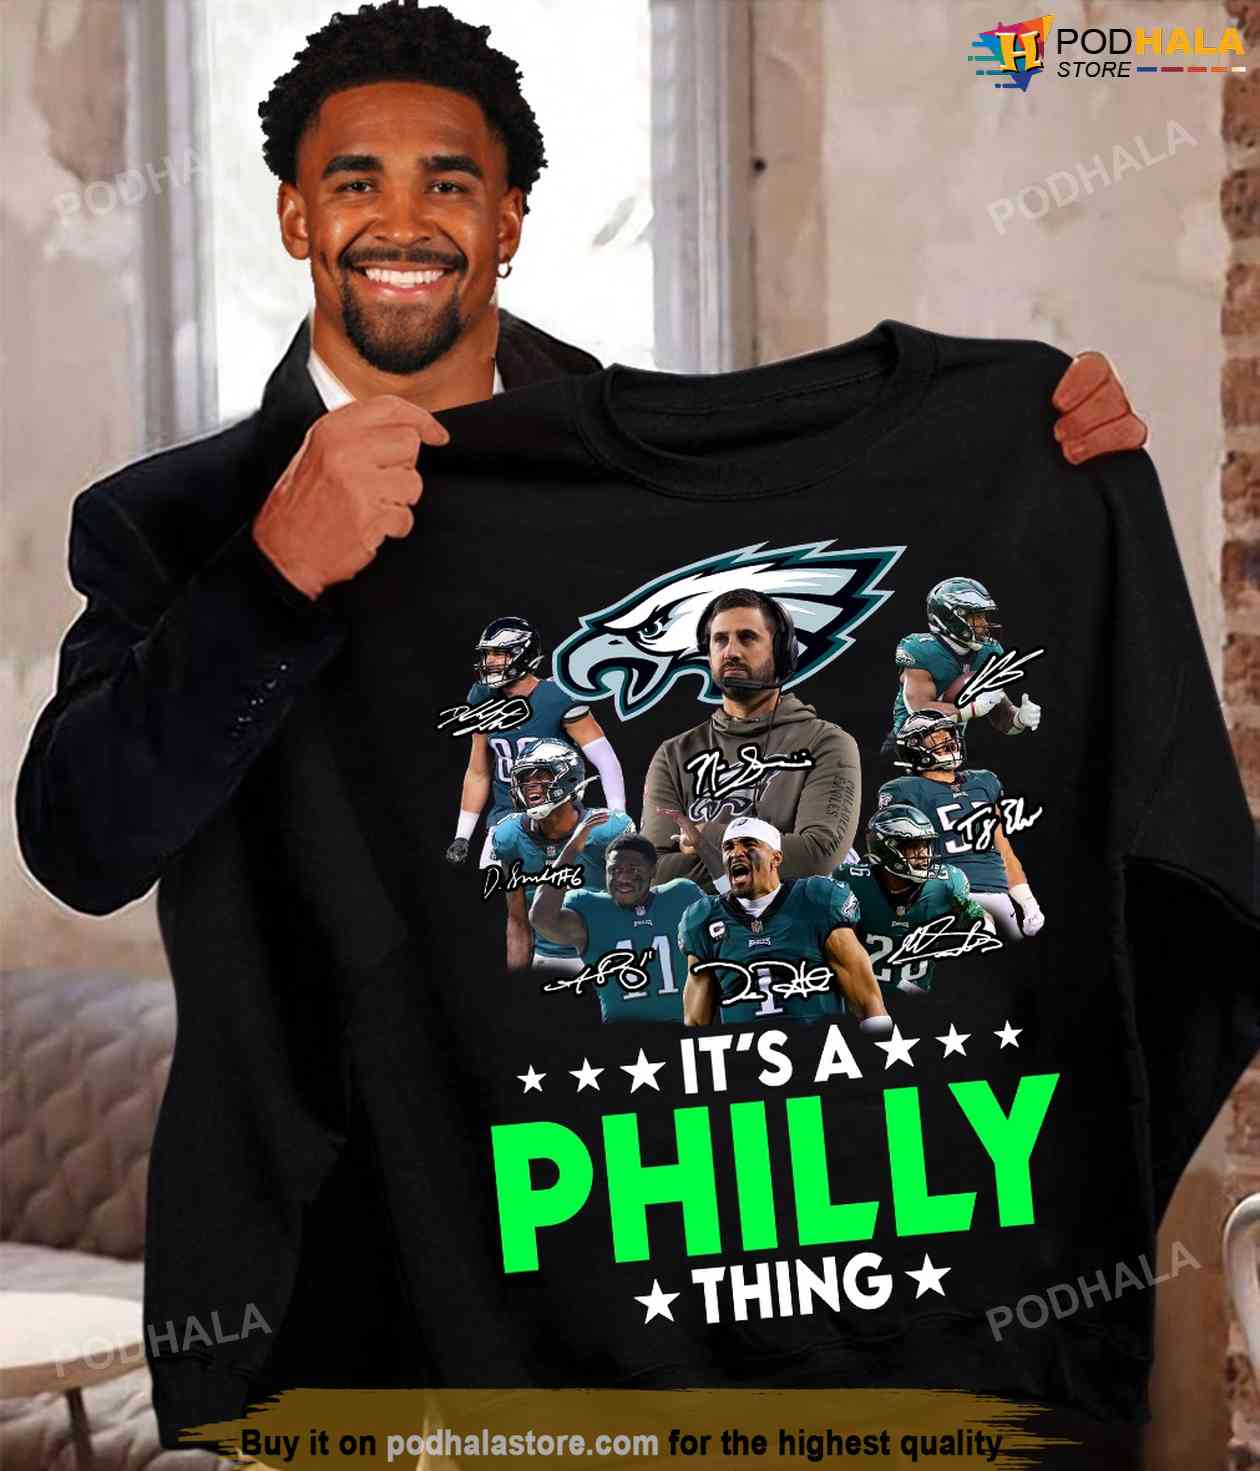 it's a philly thing t shirts